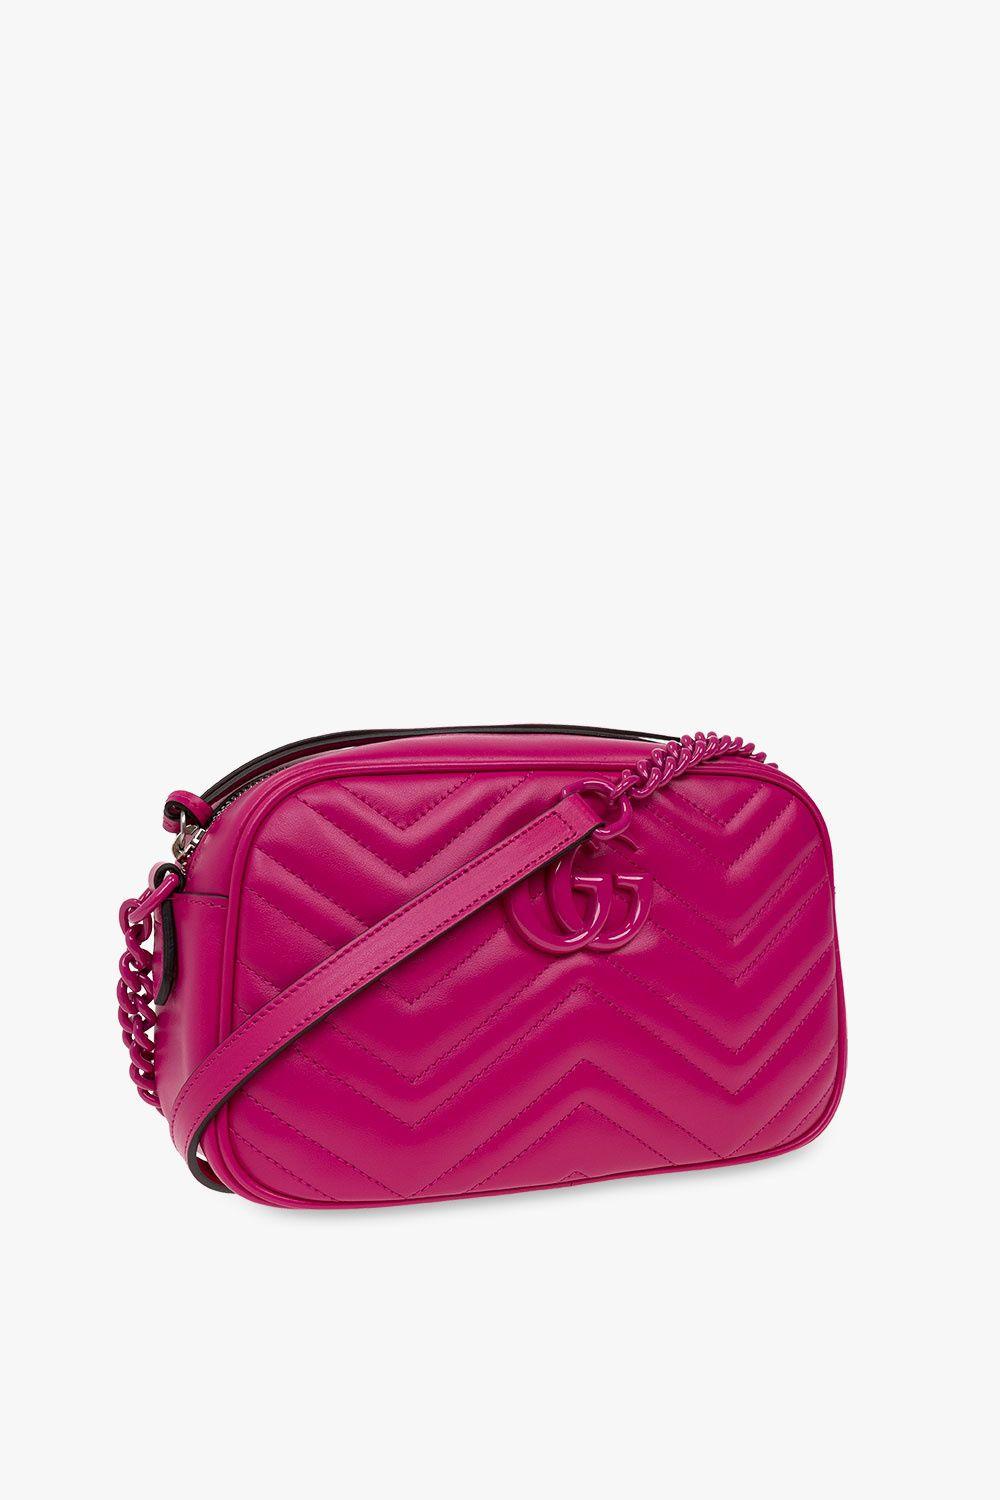 GUCCI Calfskin Matelasse Small GG Marmont Chain Shoulder Bag Perfect Pink  1281752